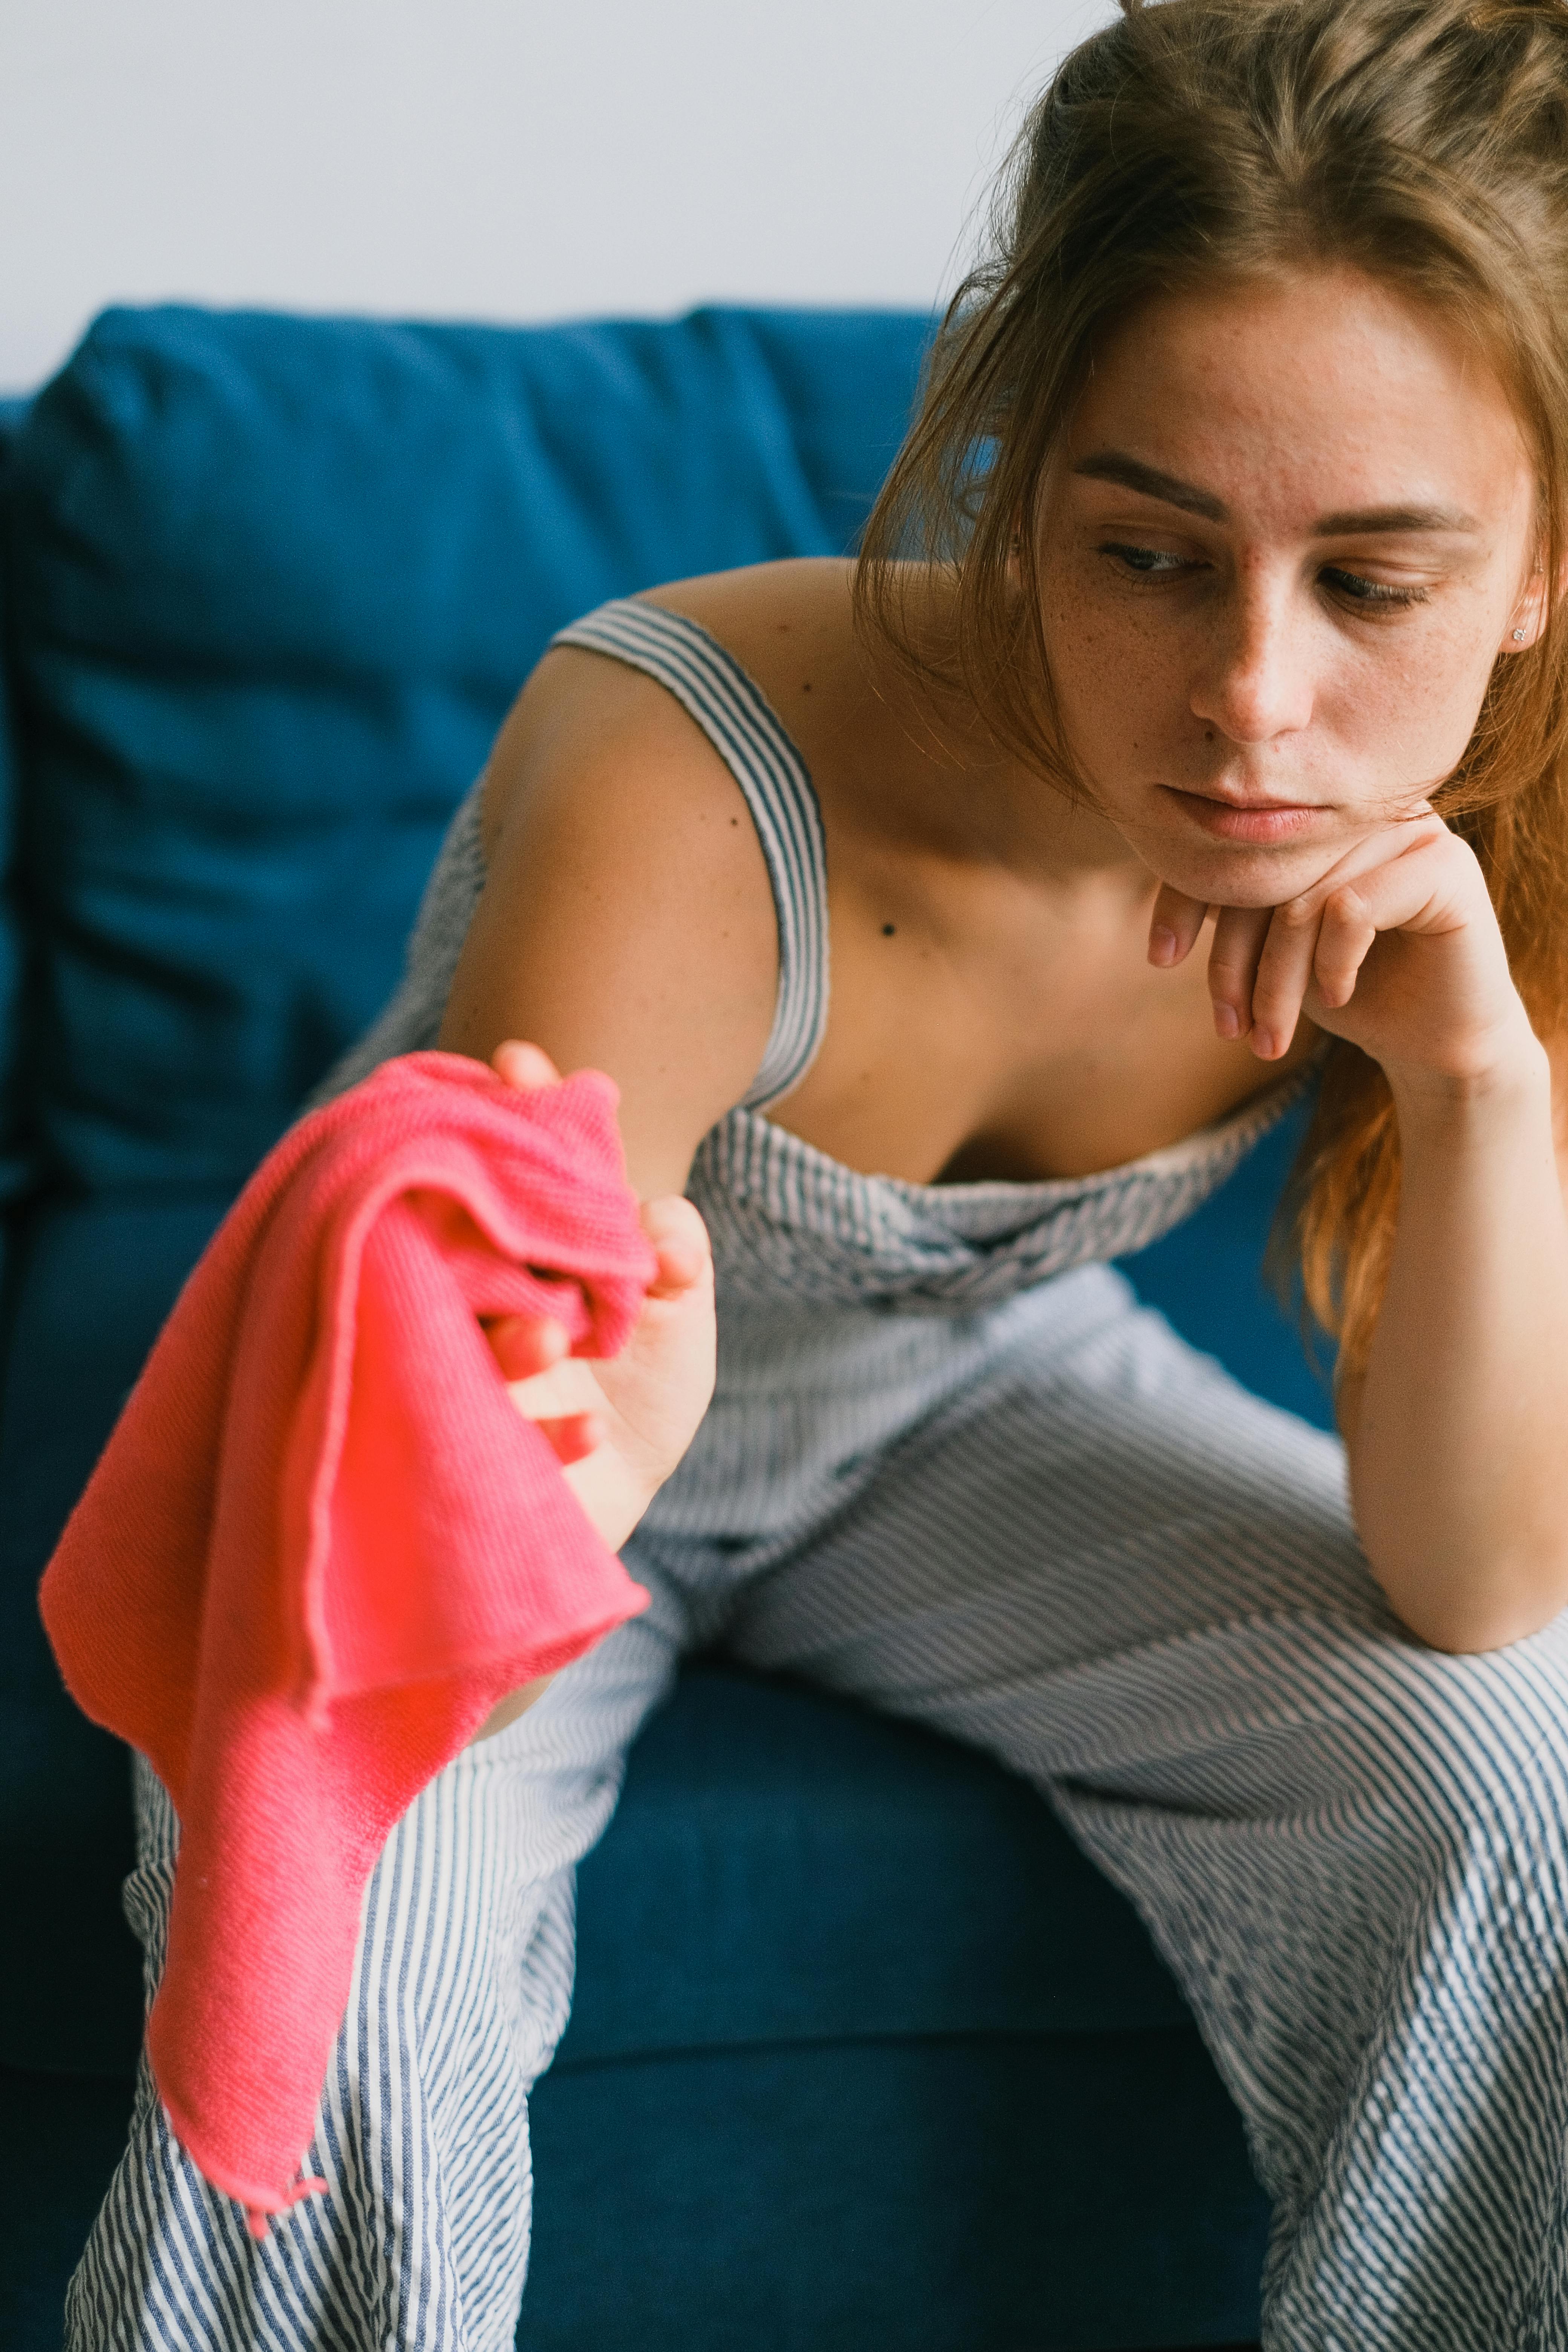 An upset and exhausted woman holding a cleaning rag | Source: Pexels